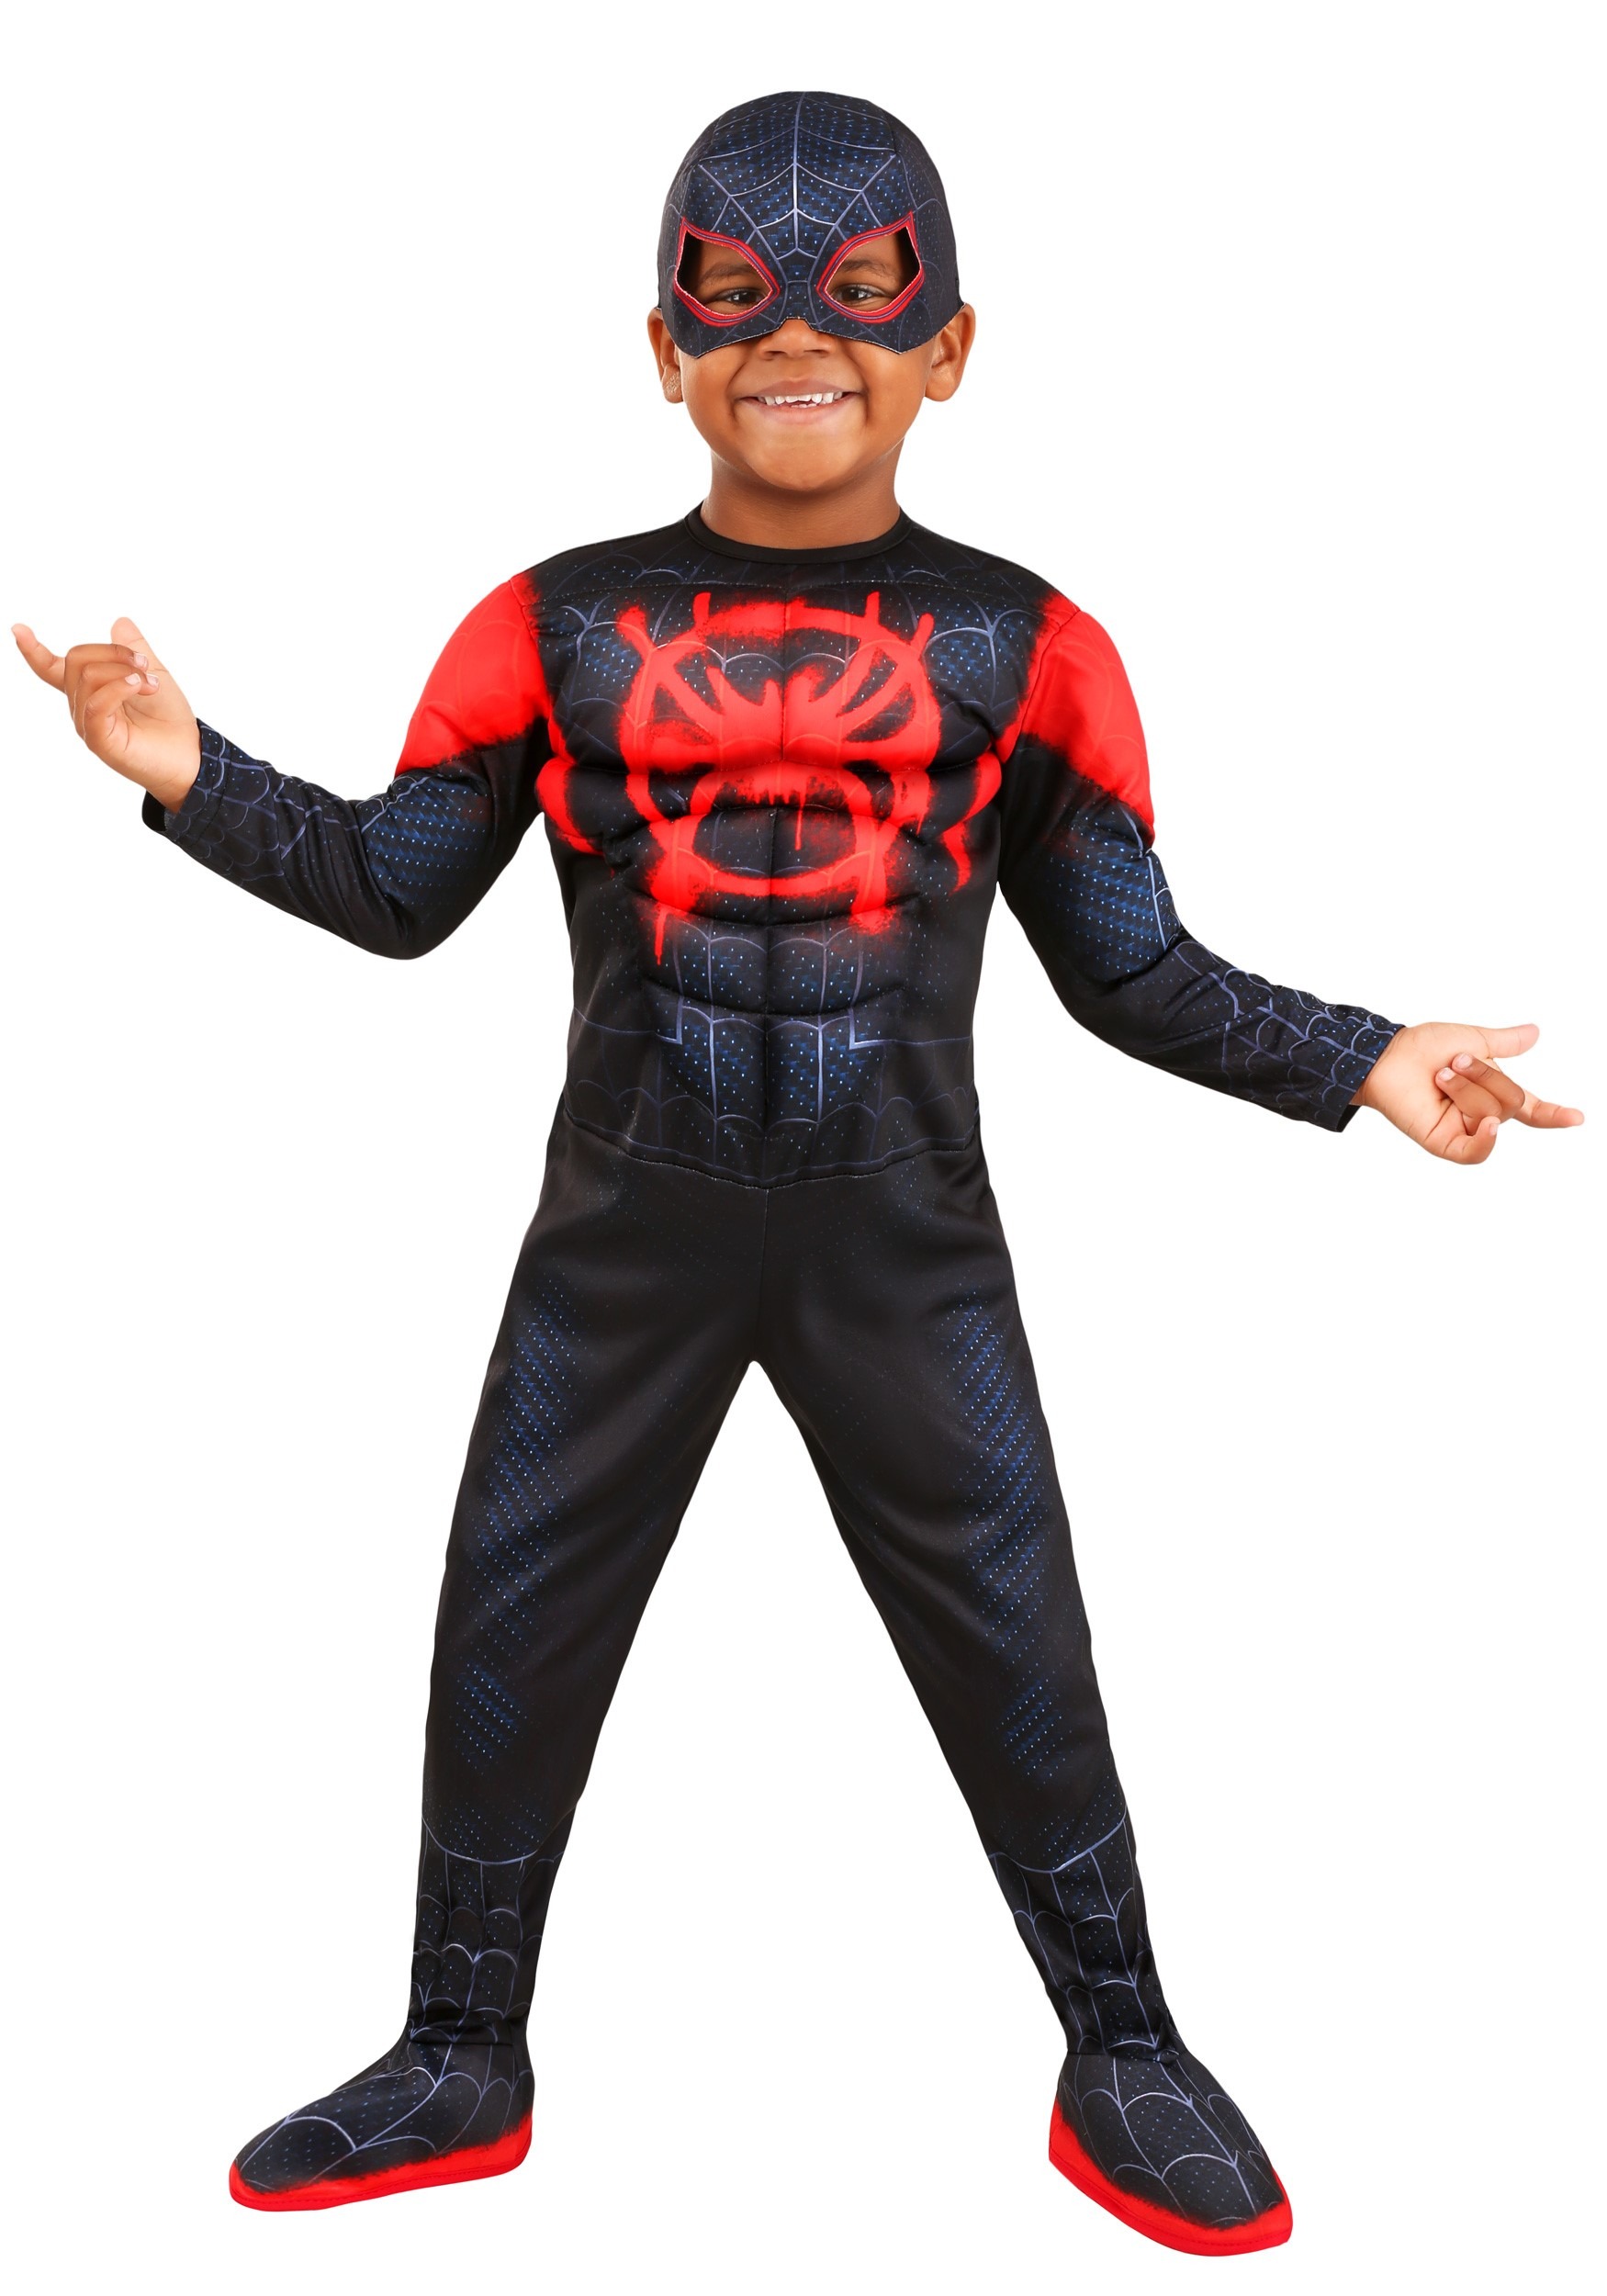 https://images.halloweencostumes.ca/products/69117/1-1/toddler-deluxe-miles-morales-costume.jpg